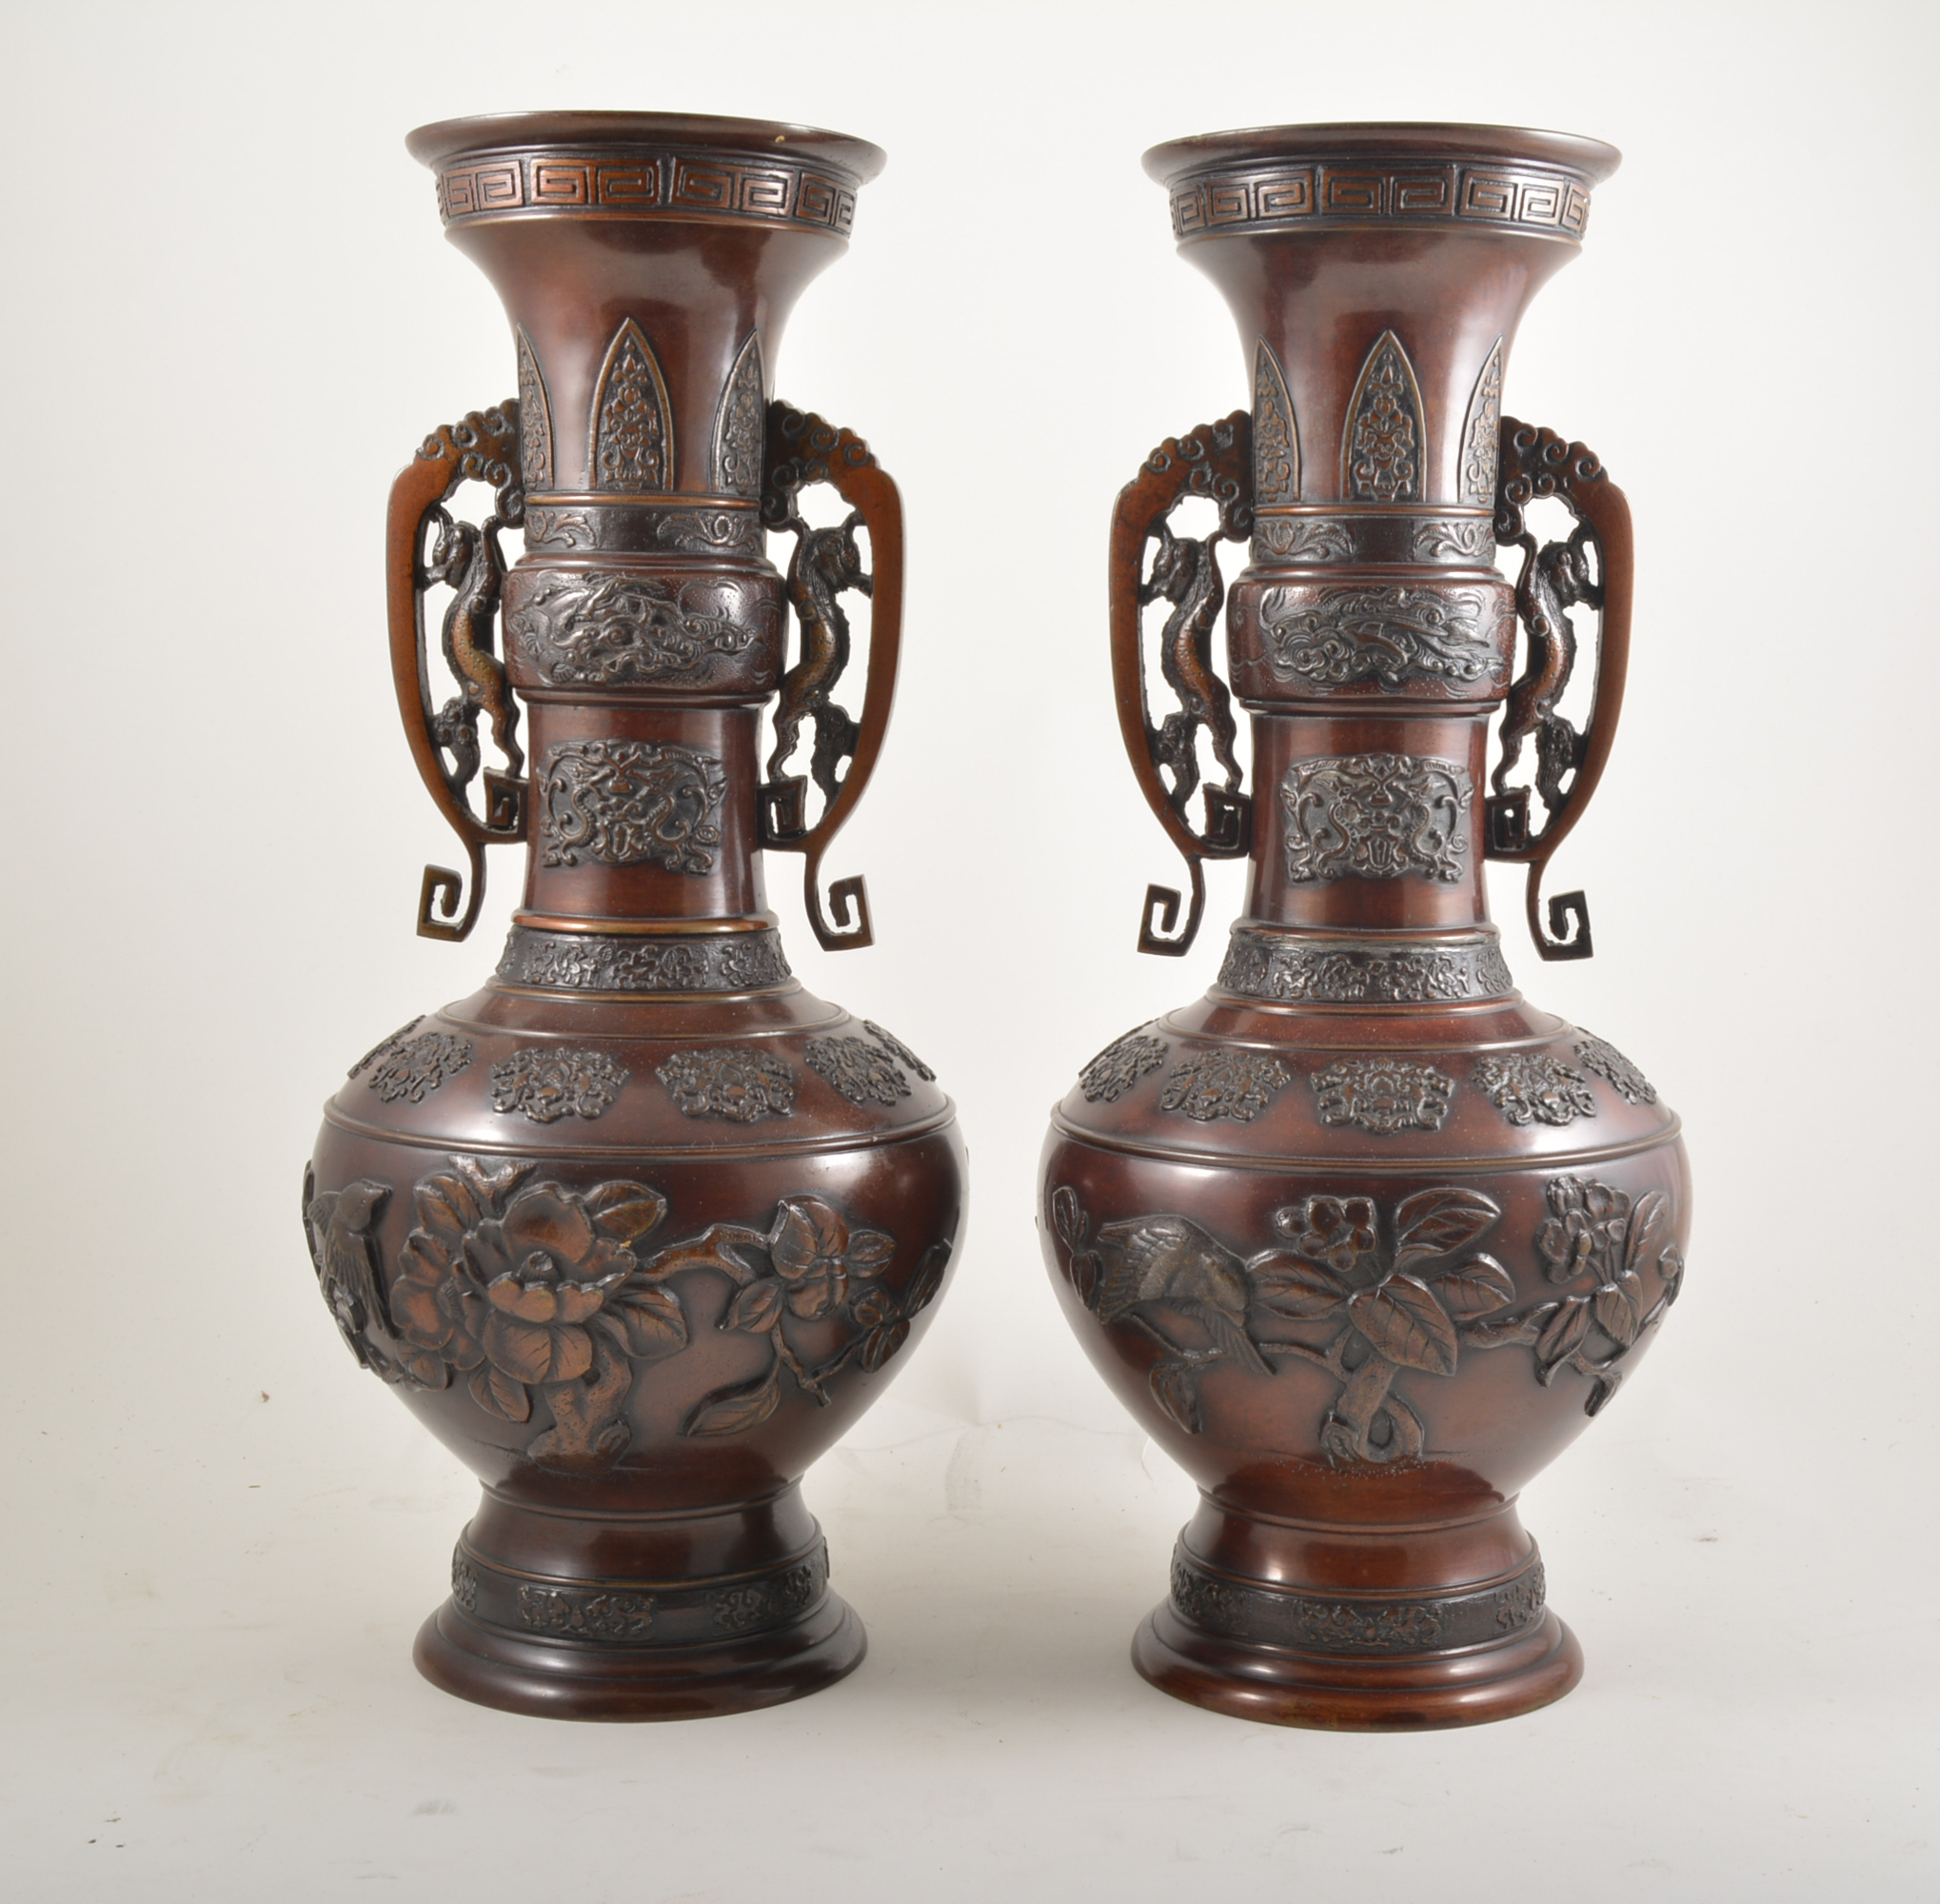 Pair of Chinese bronze vases, archaic form, twin scrolled handles, applied motifs,